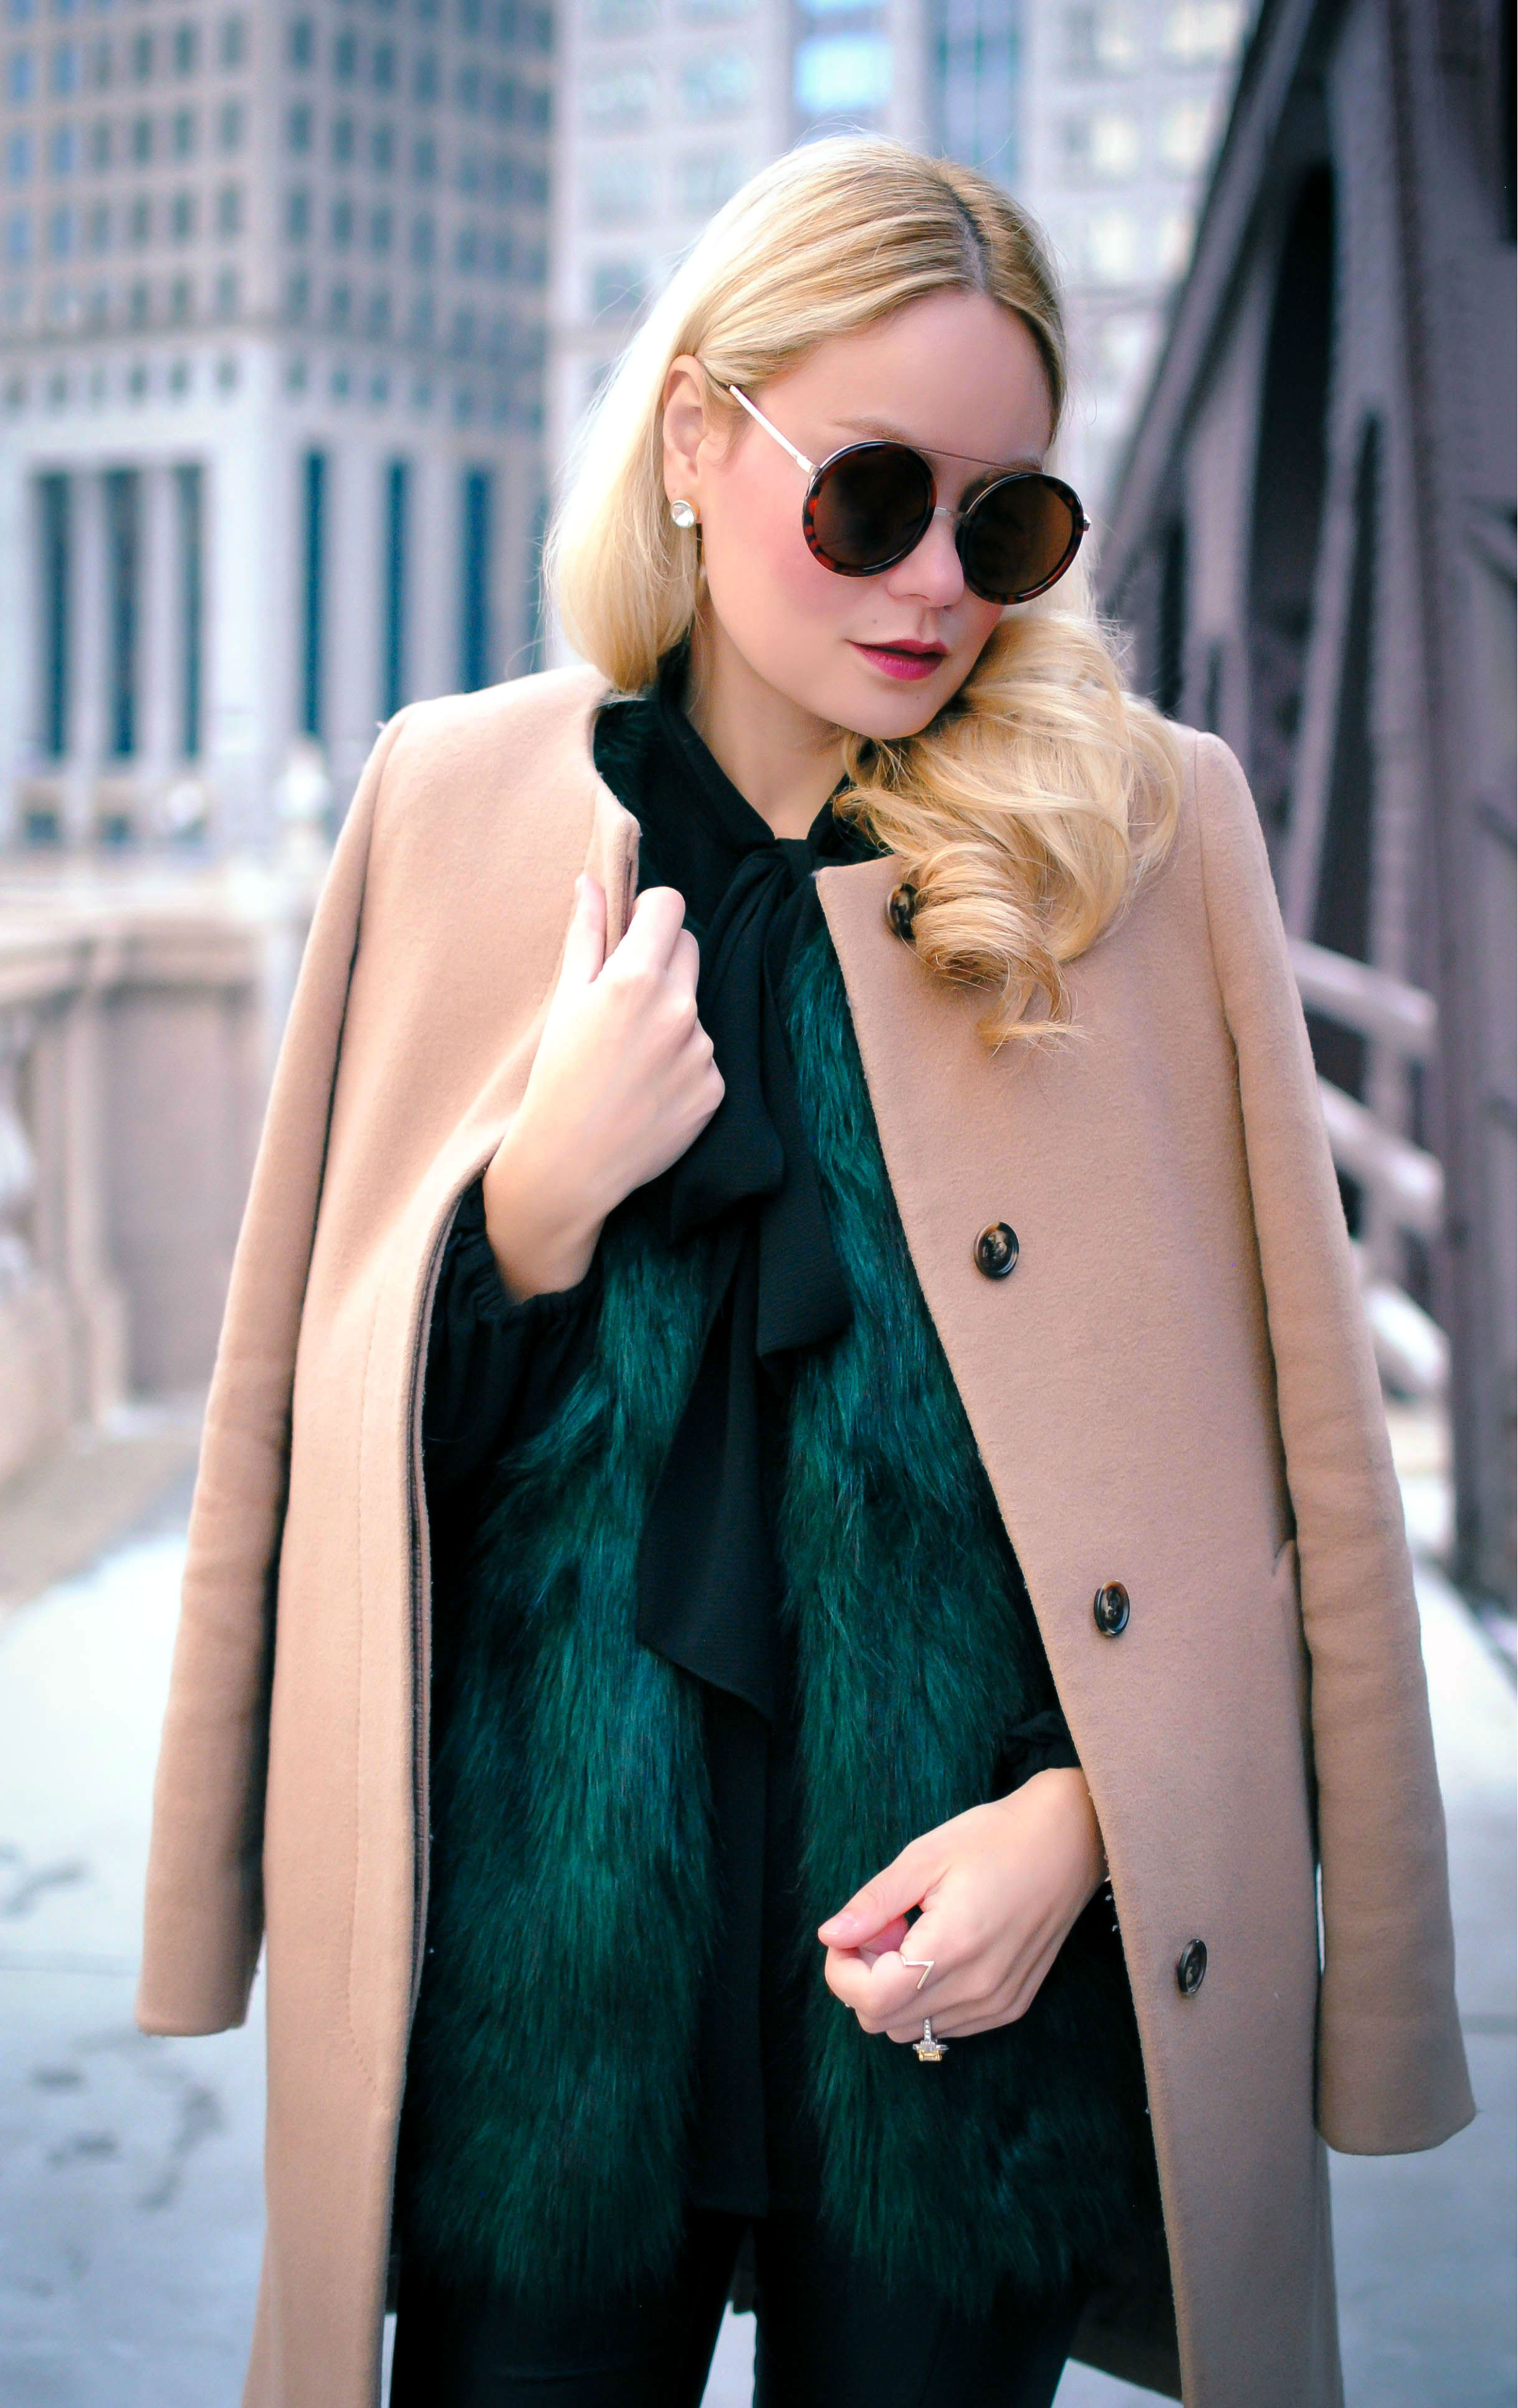 Streetstyle_Camel Coat_Cozy Winter Fashion_What Would V Wear